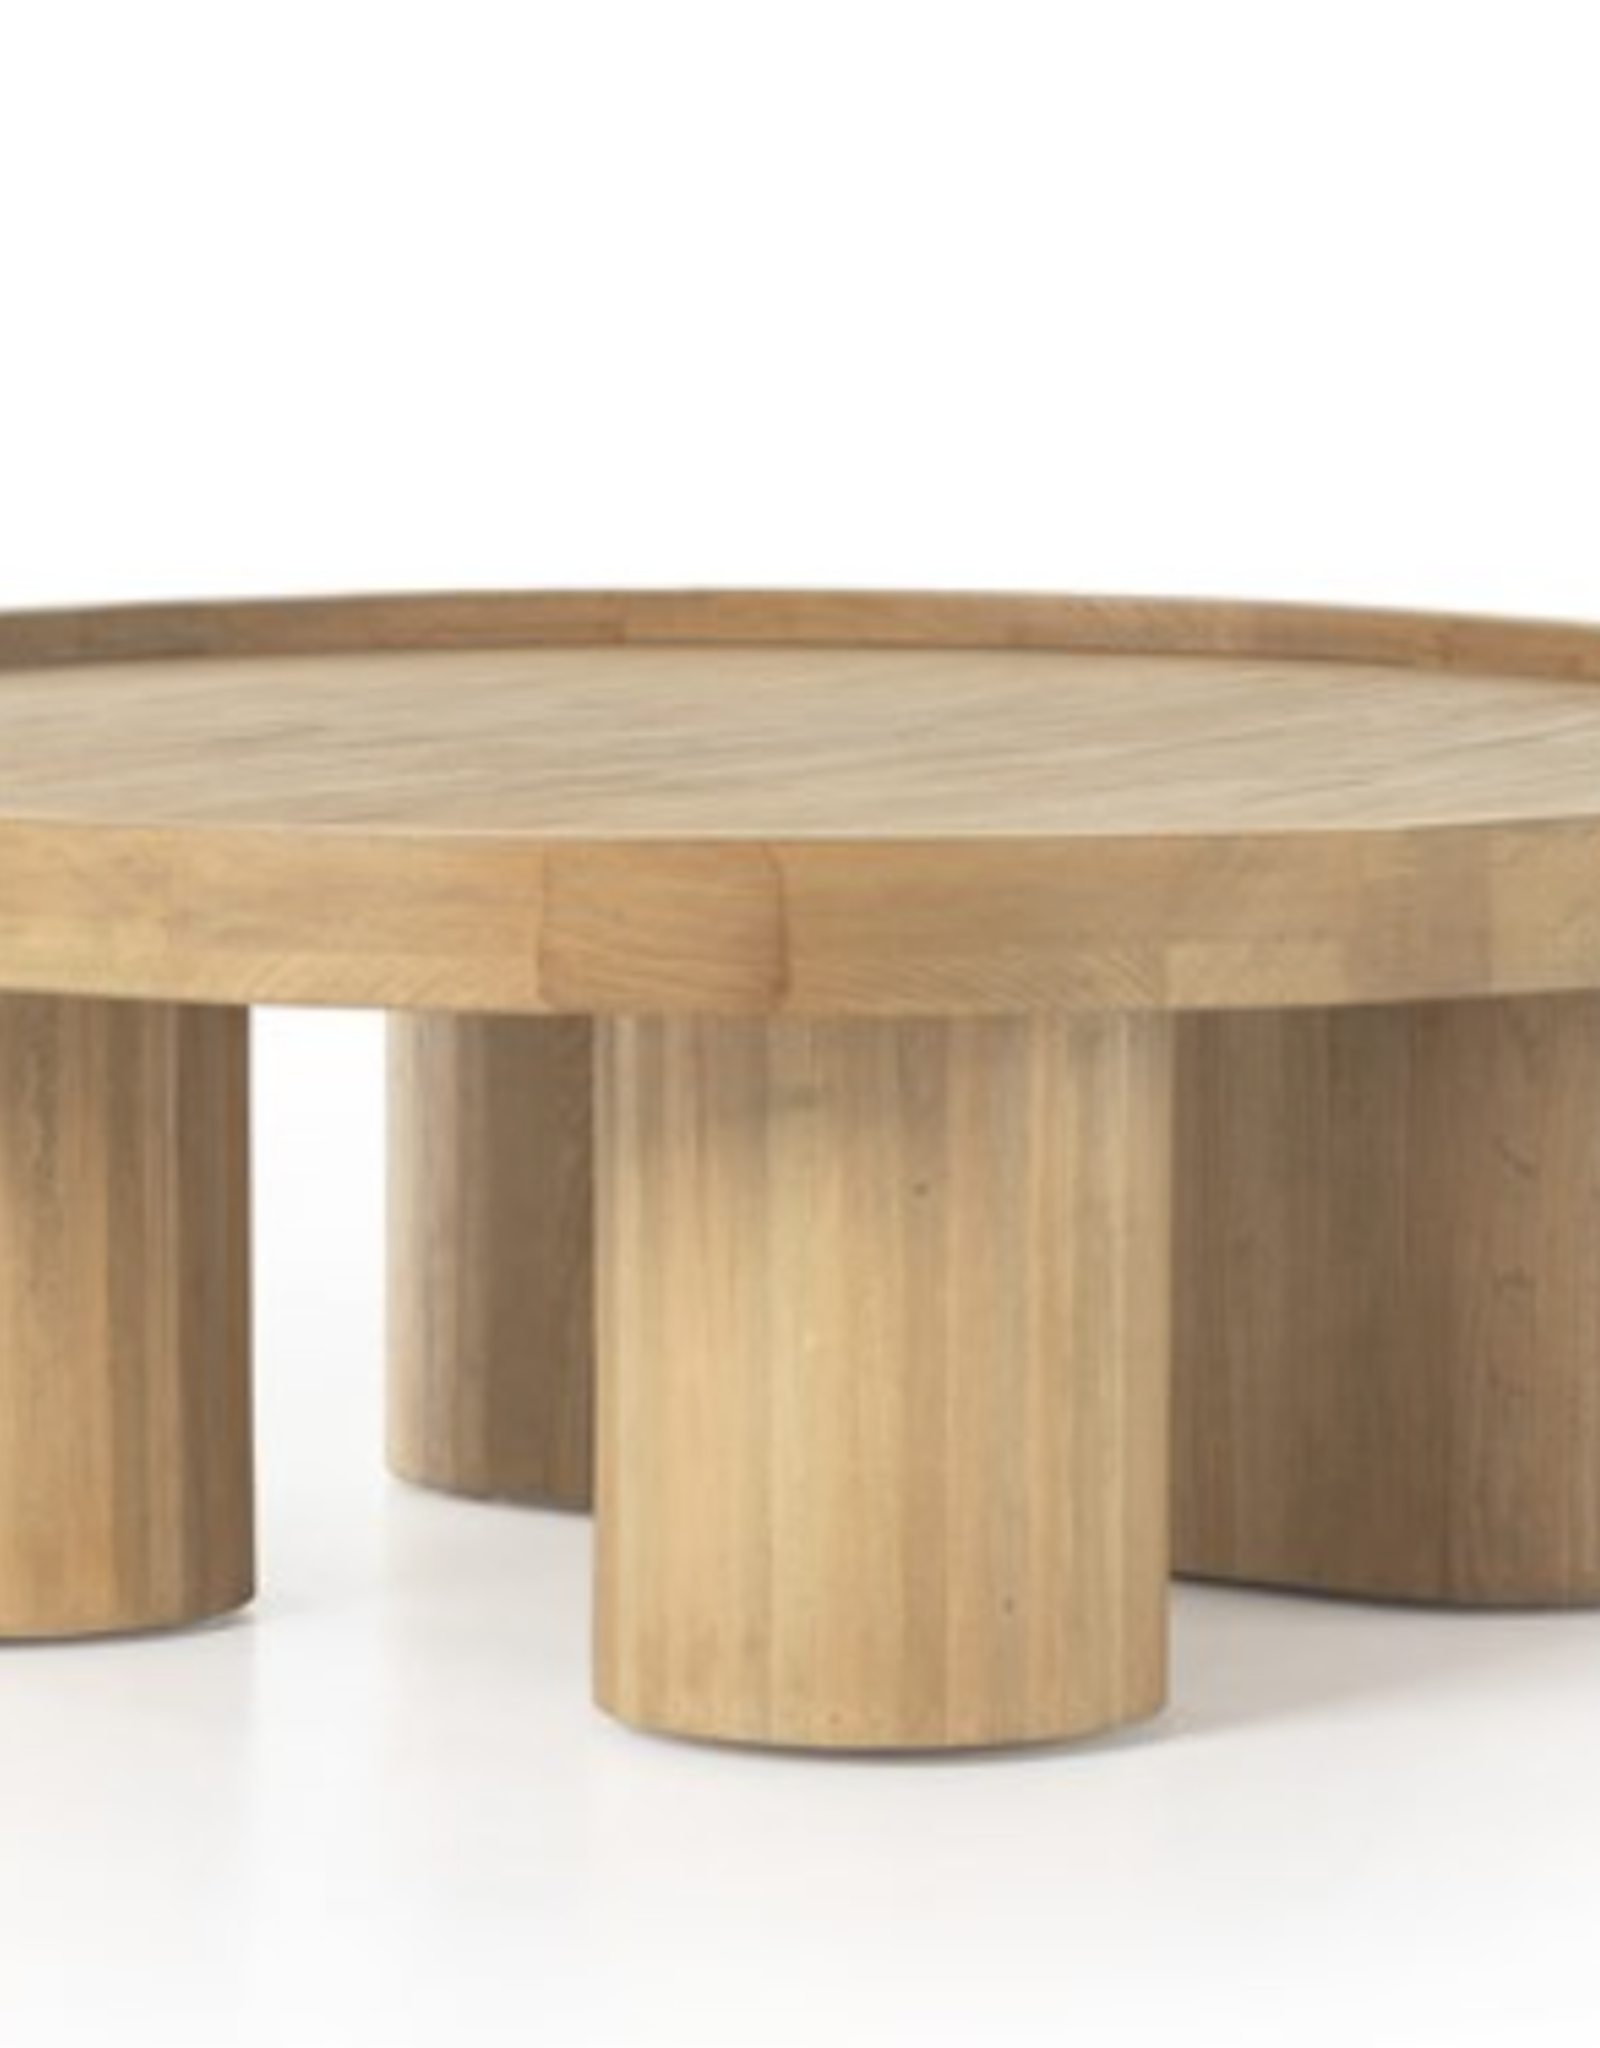 Schwell Coffee Table, Natural Beech